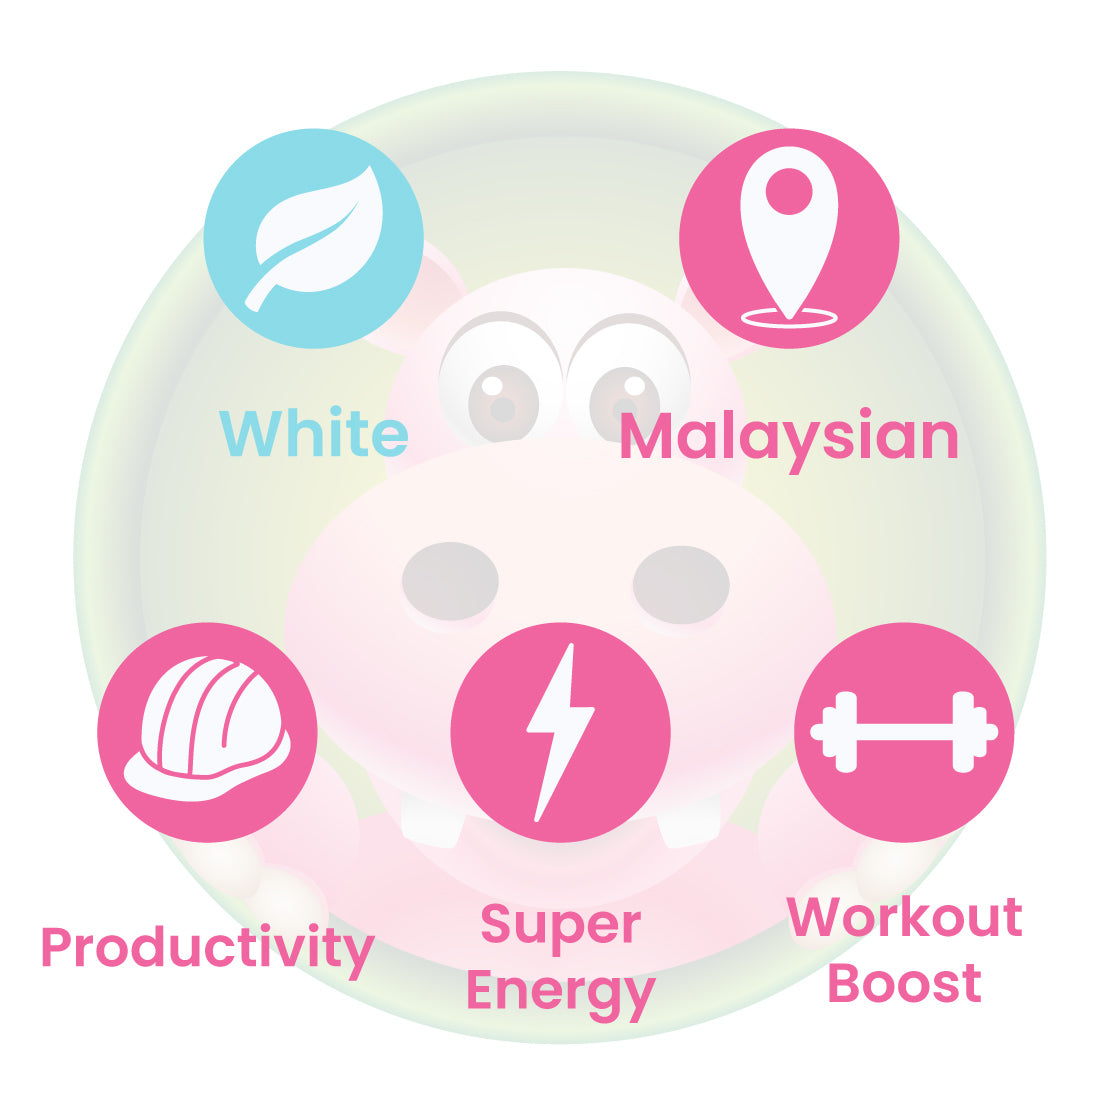 Infographic Details for Happy Hippo White Vein Malay Kratom Powder. Leaf color: White Vein. Kratom Strain Origin: Malay. Kratom Effects resonate with Super Energy, Workout Boost, and Productivity.